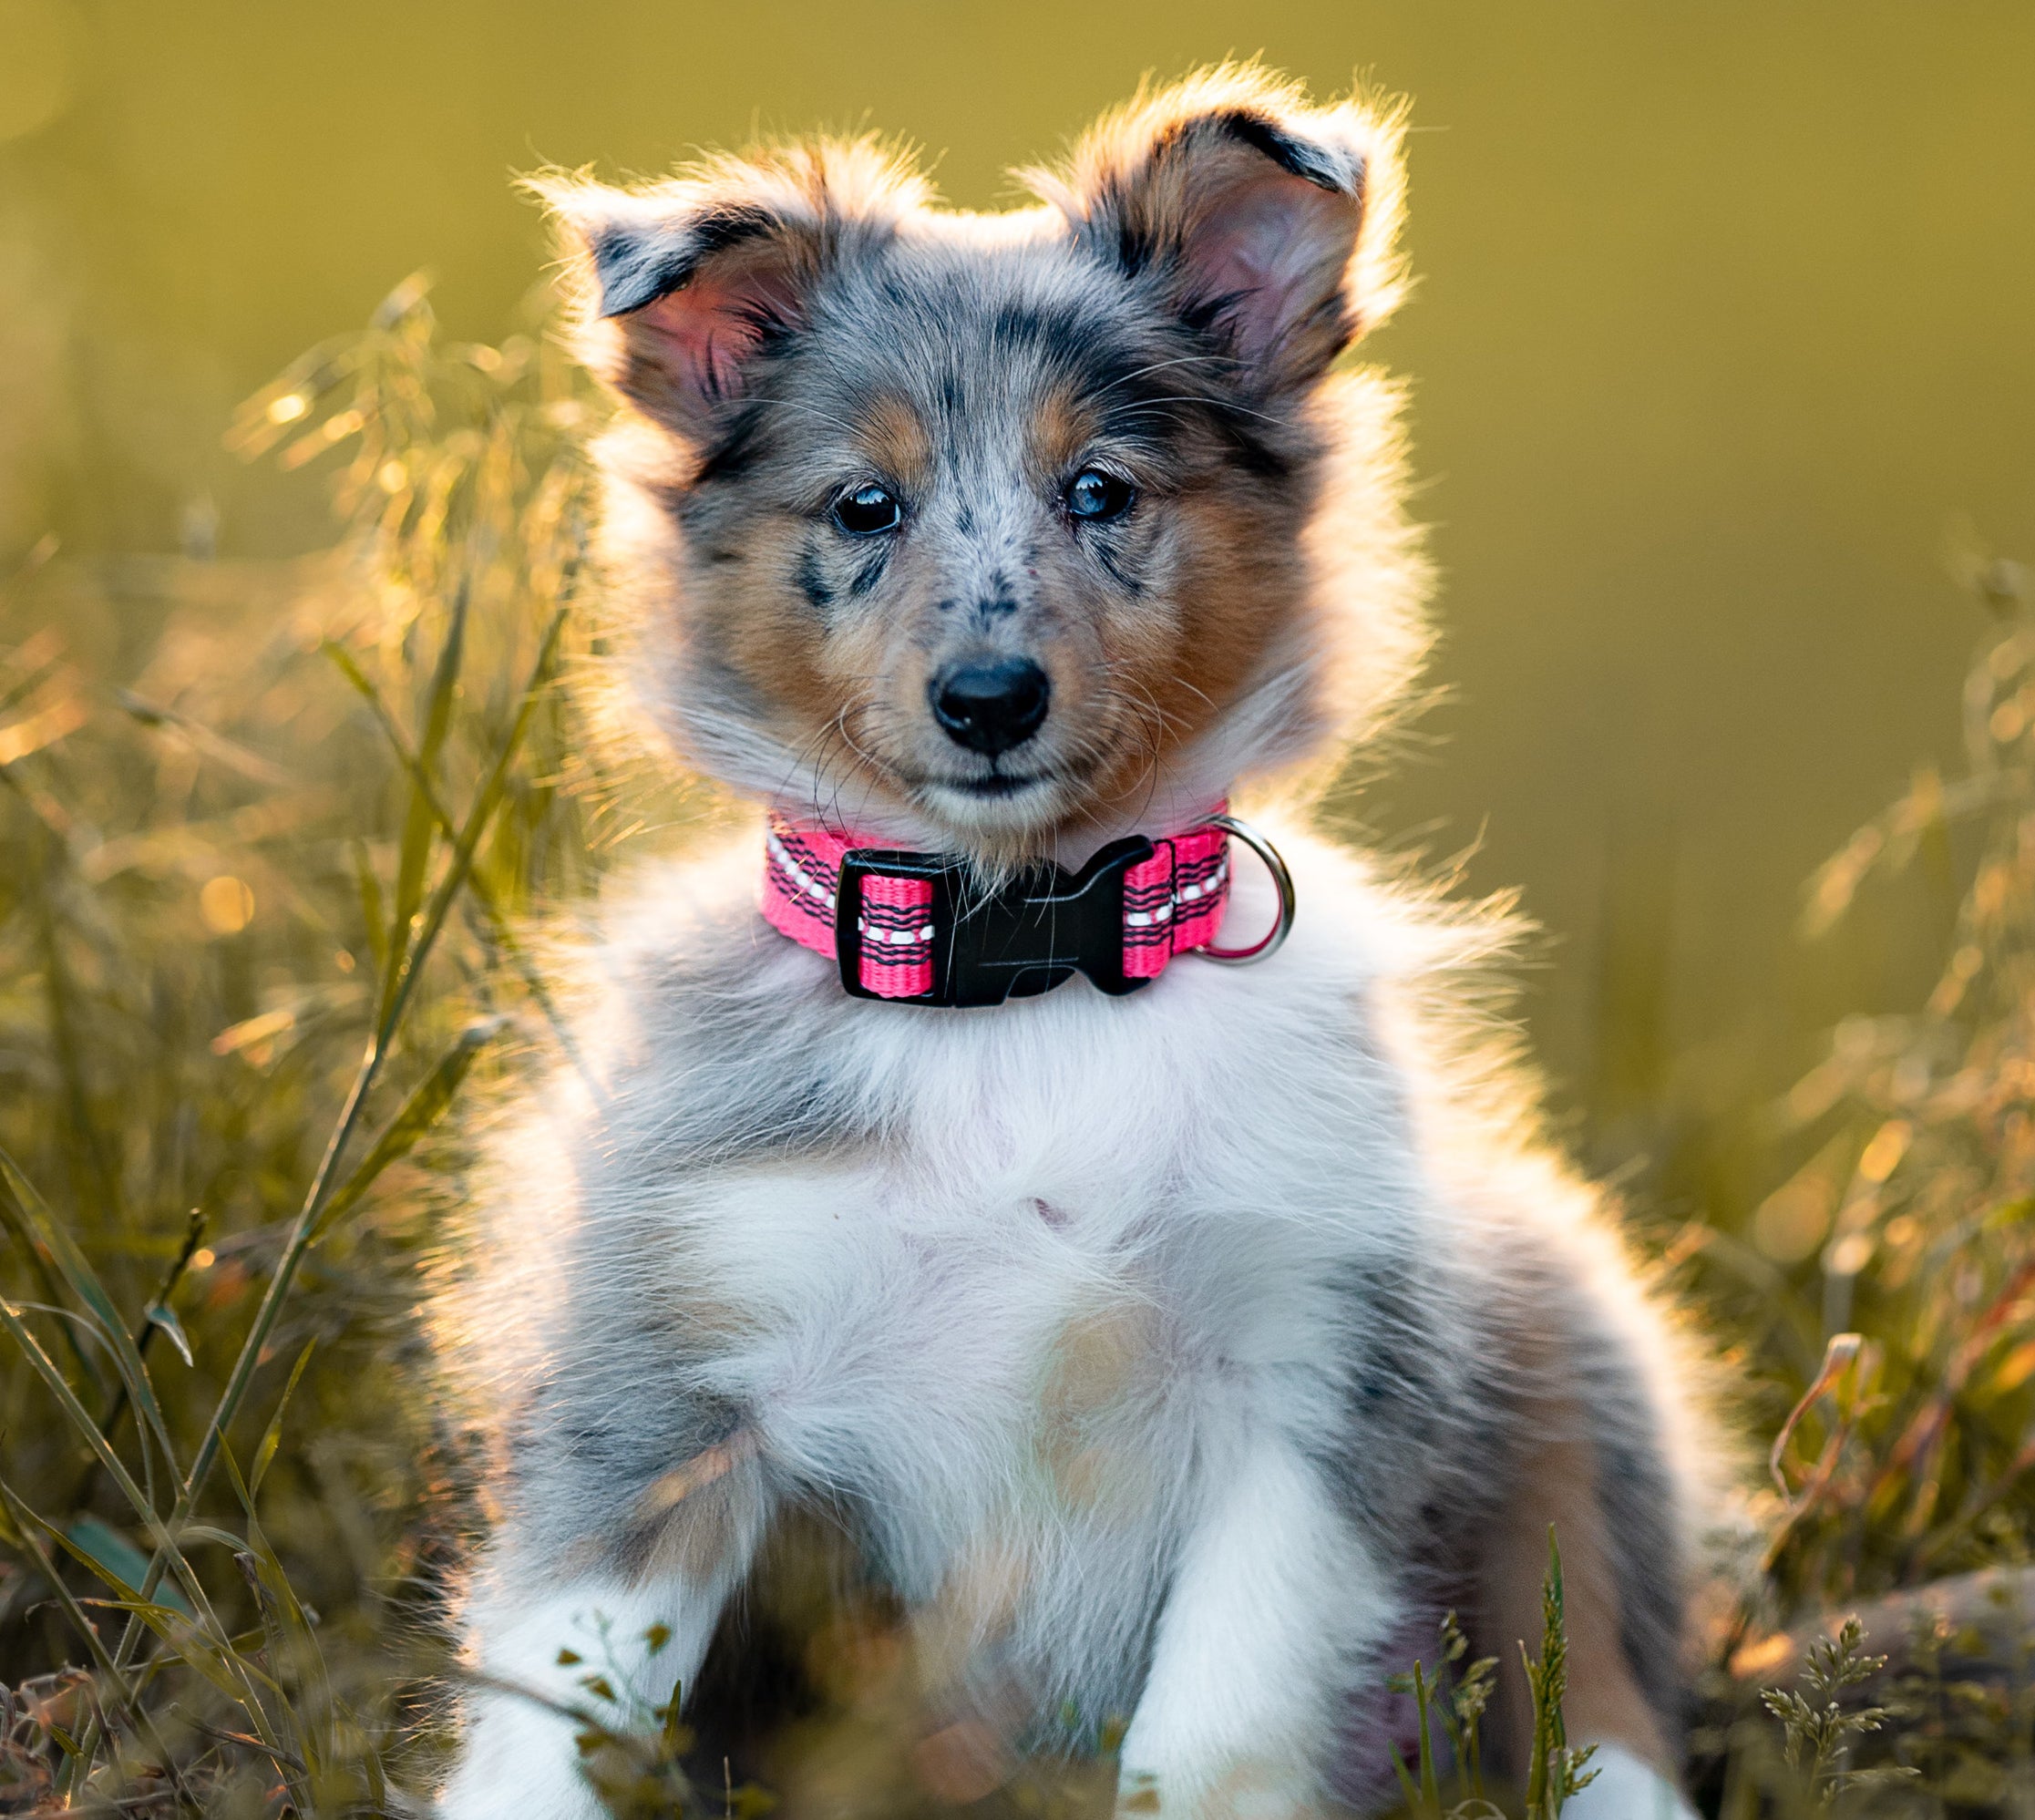 A young Shetland sheepdog sits in a field